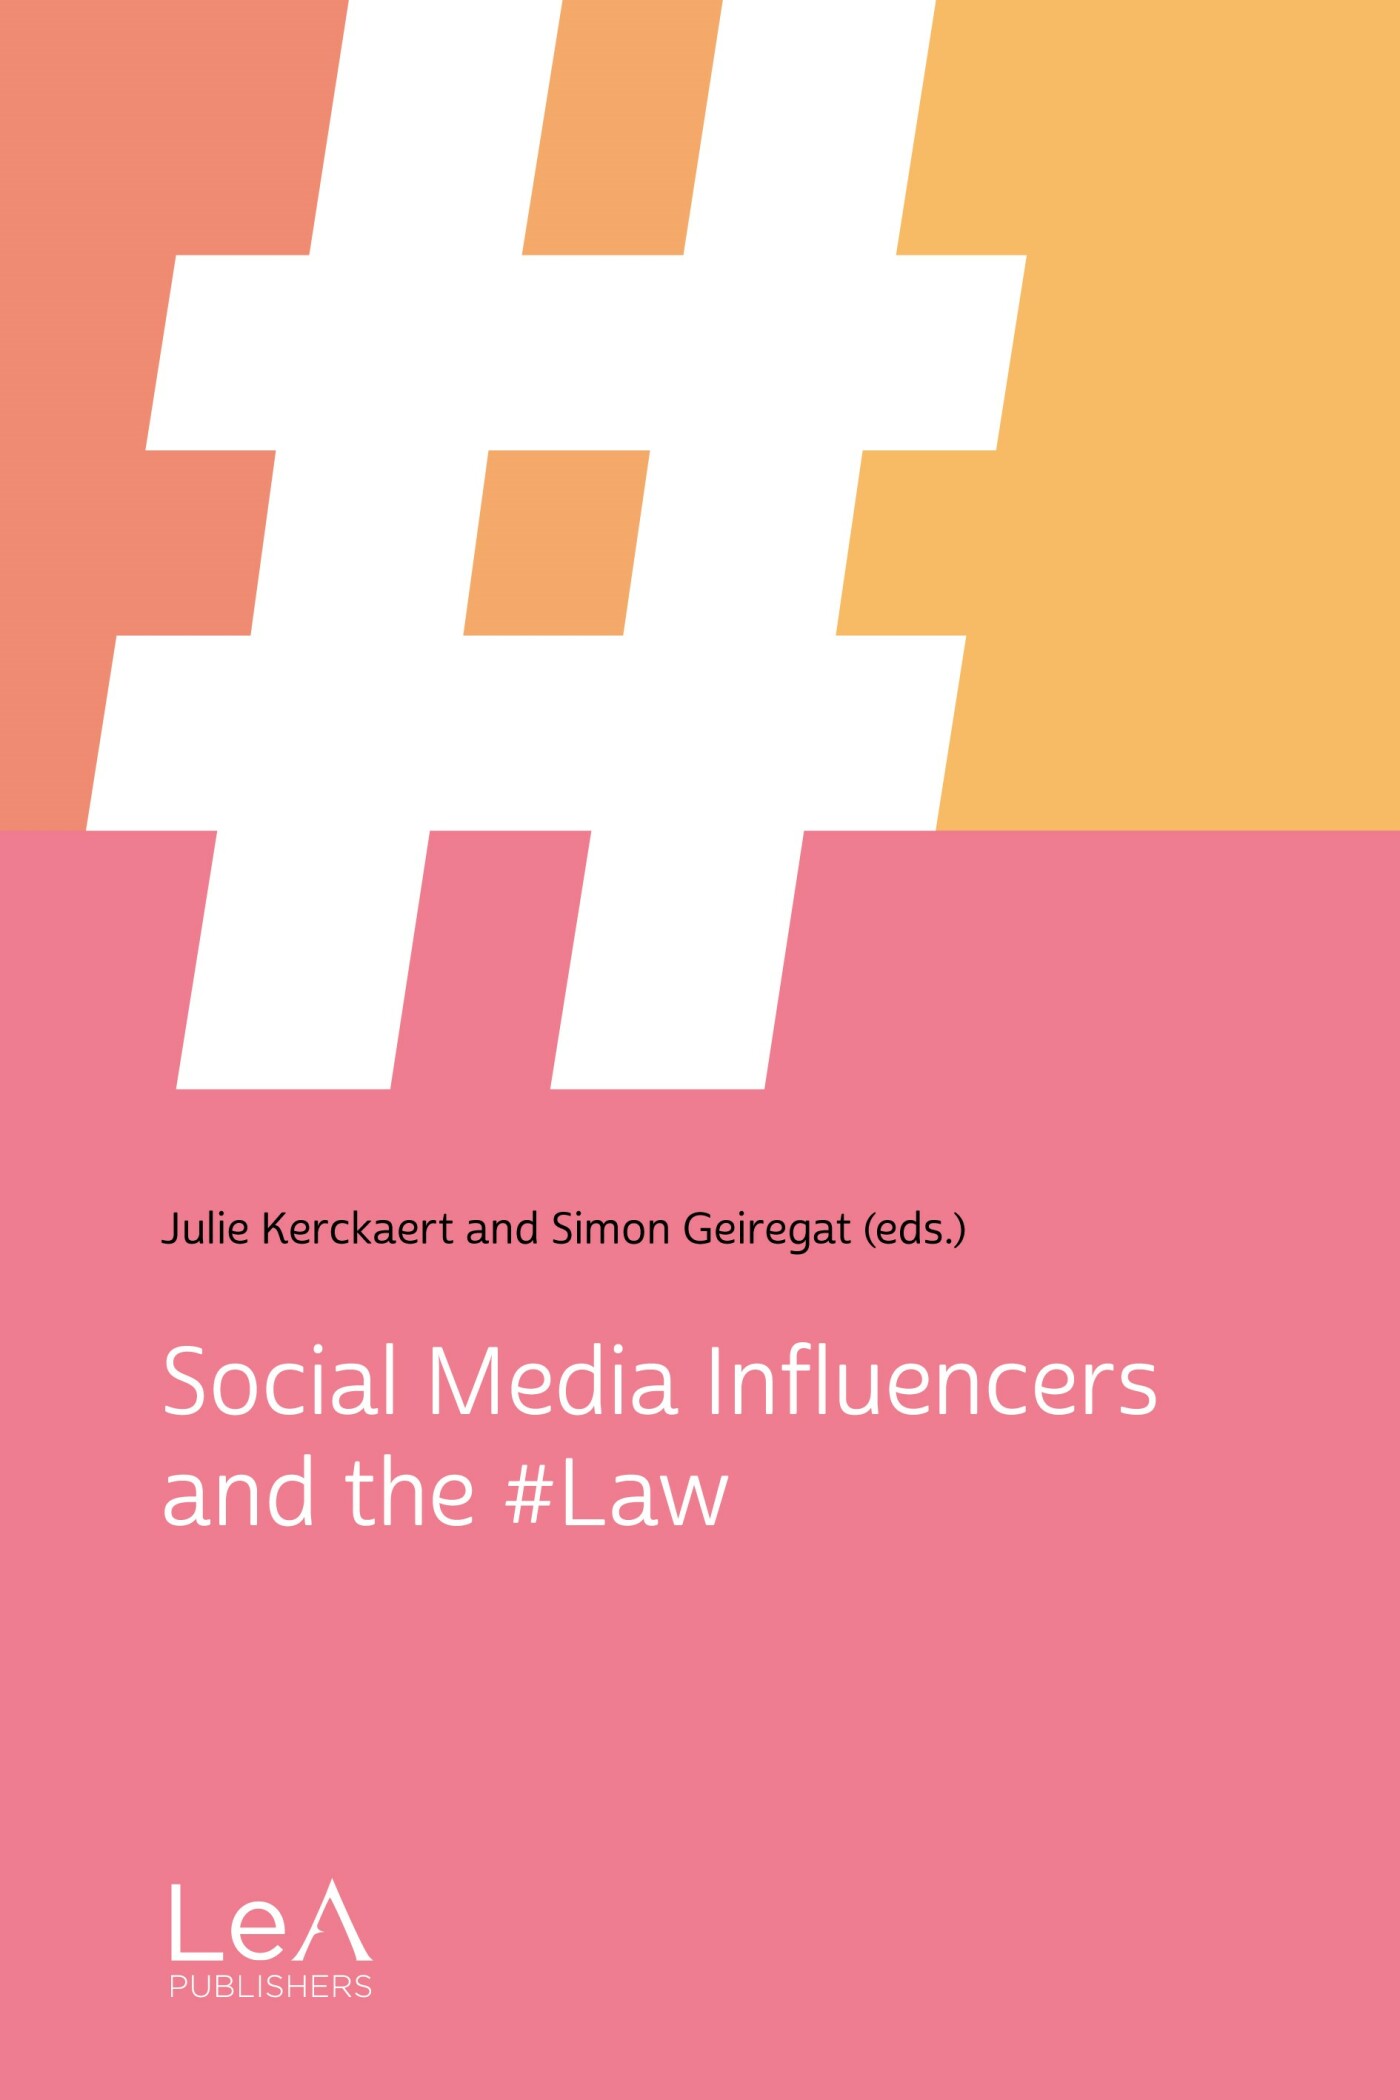 Social Media Influencers and the #Law